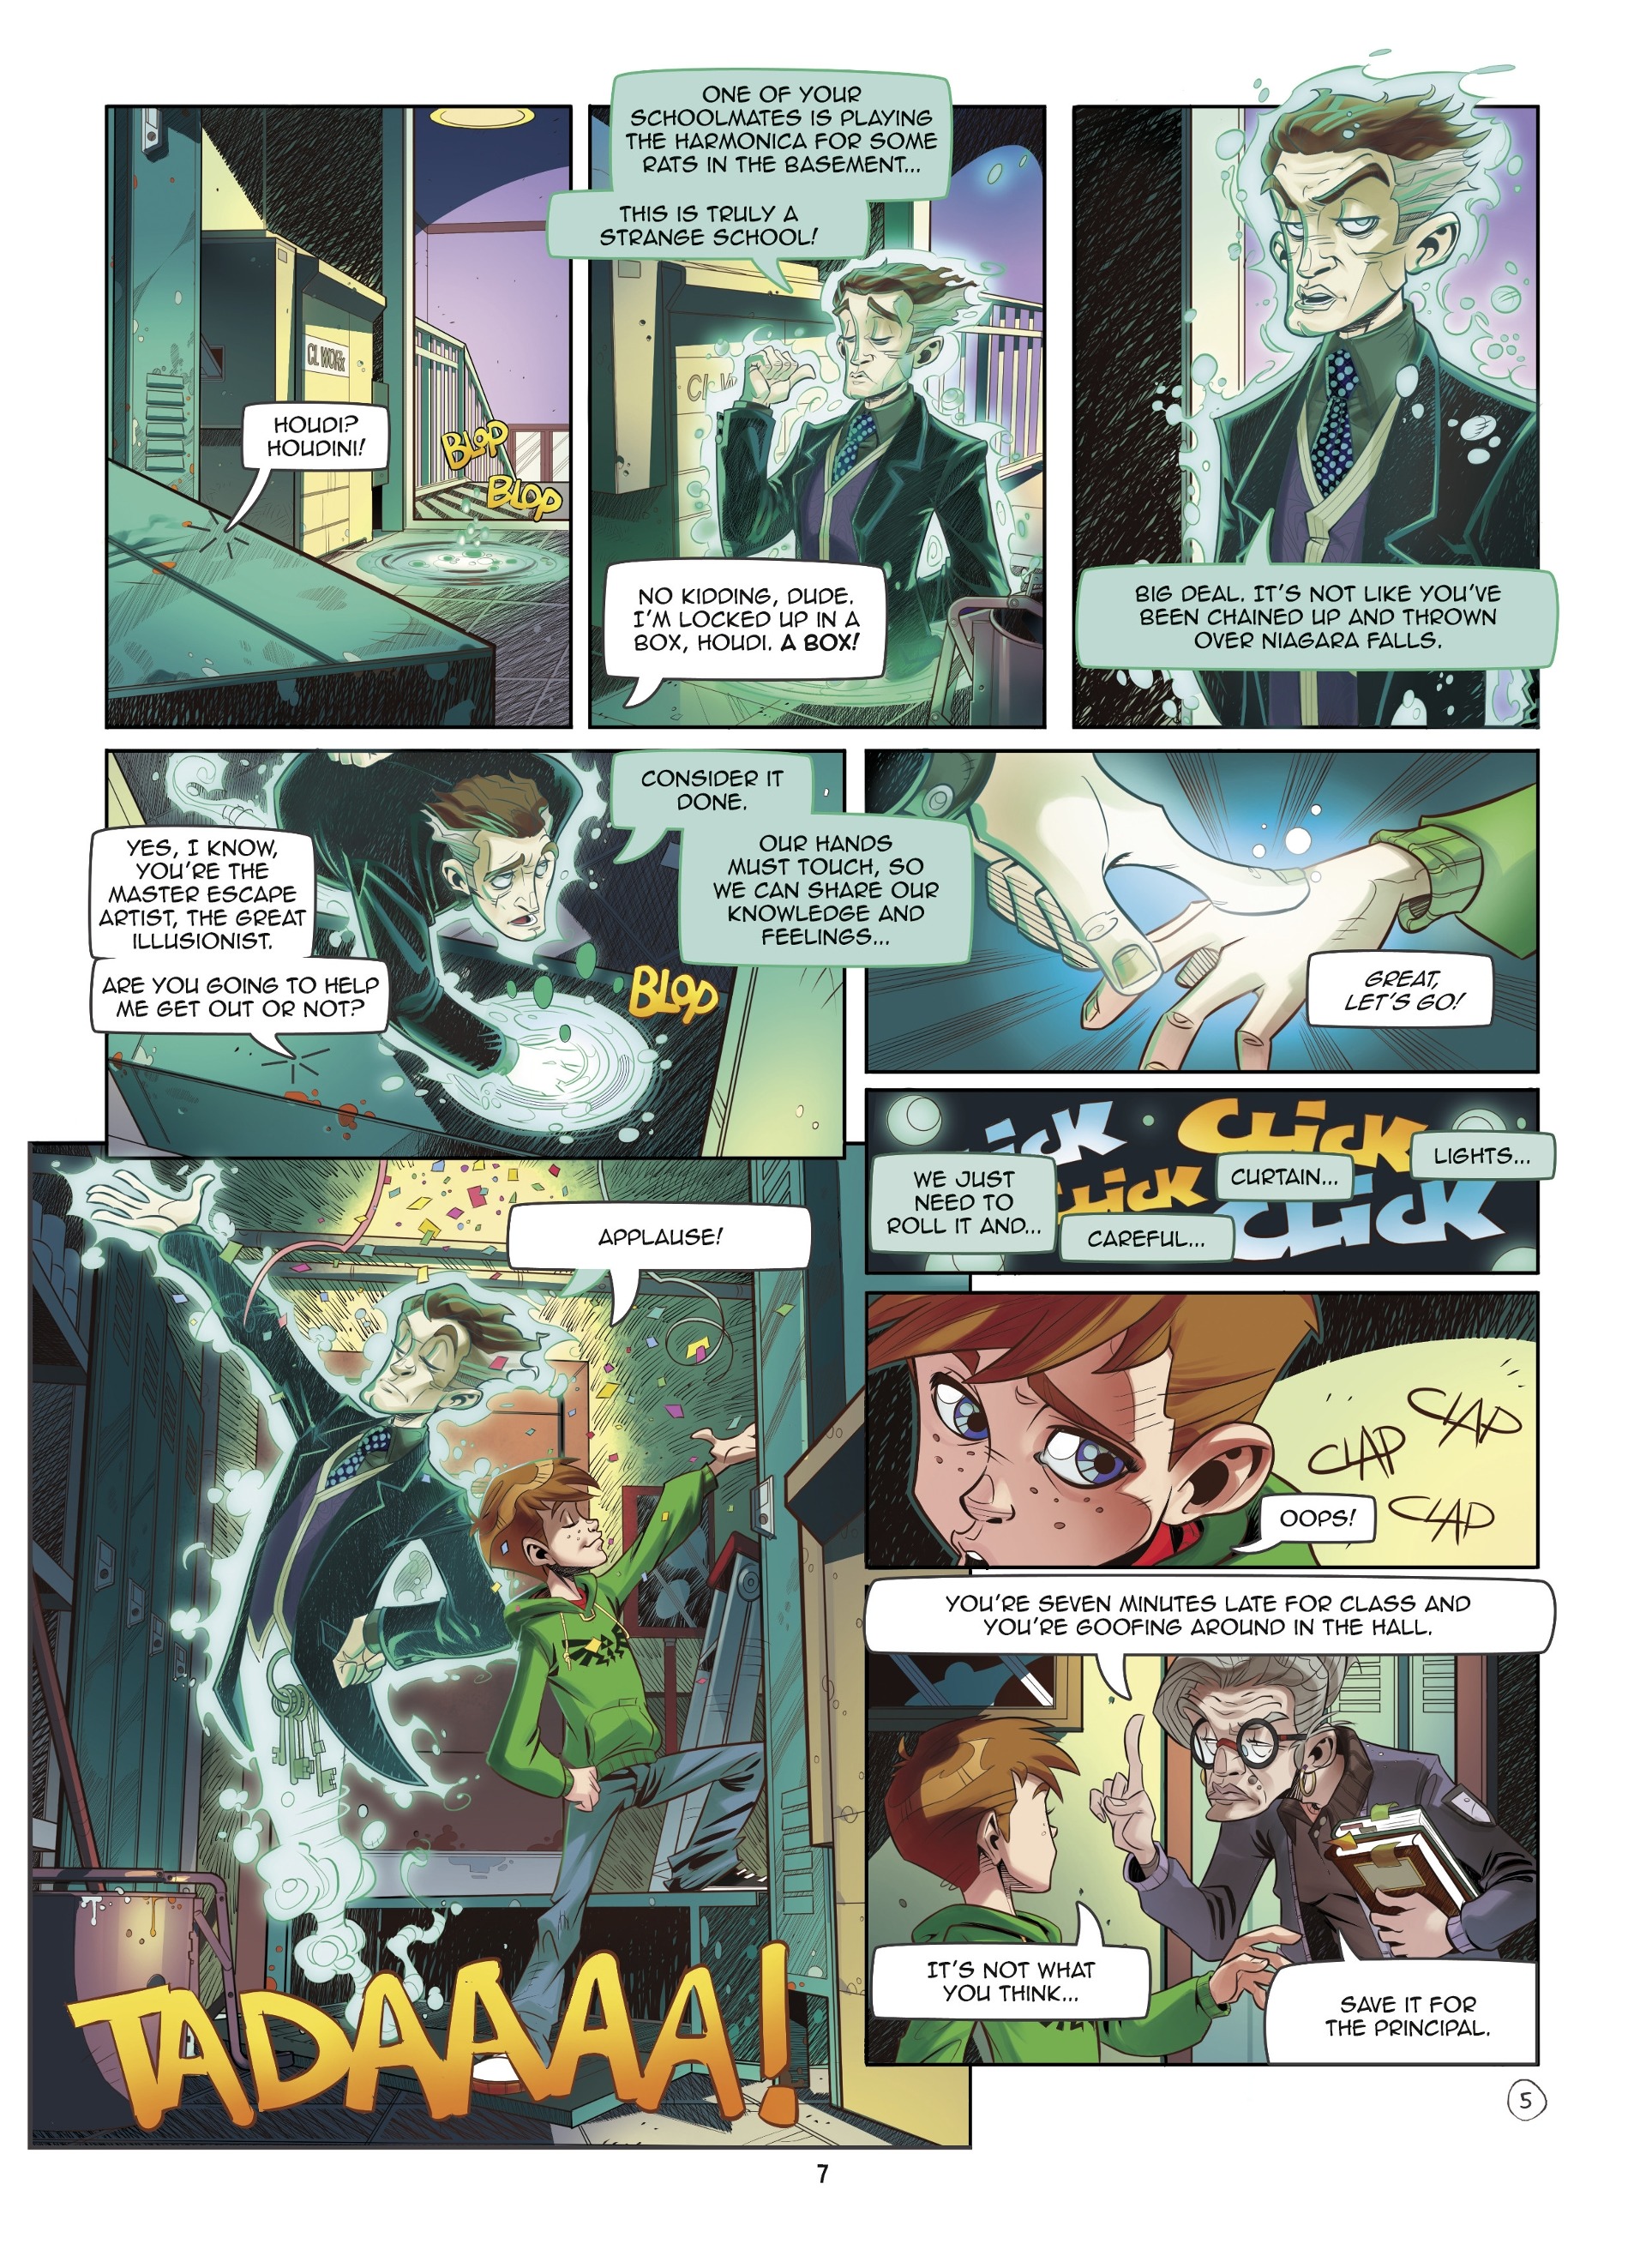 Magic 7 (2020-): Chapter 1 - Page 8